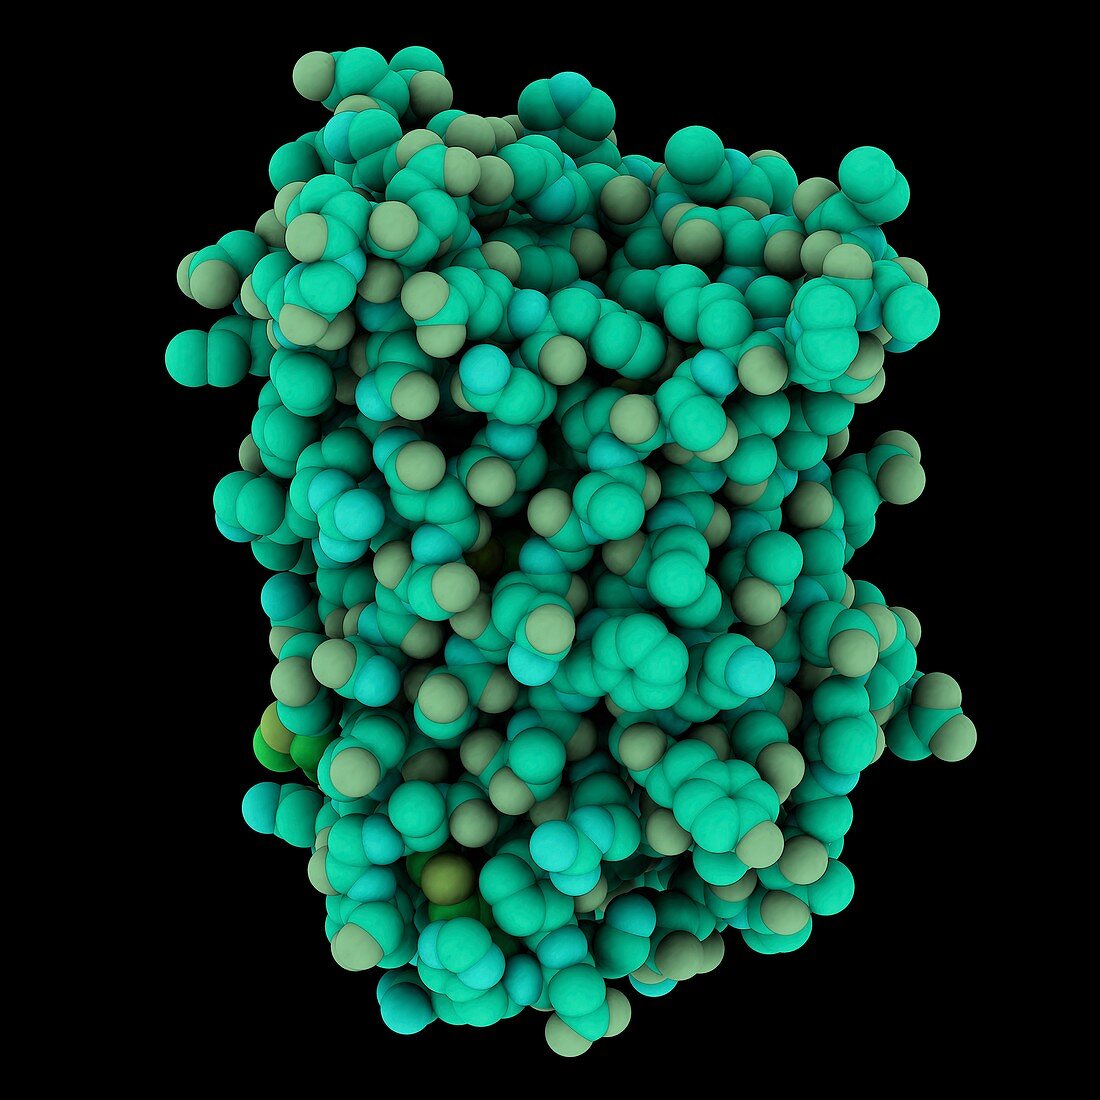 Green fluorescent protein (GFP)